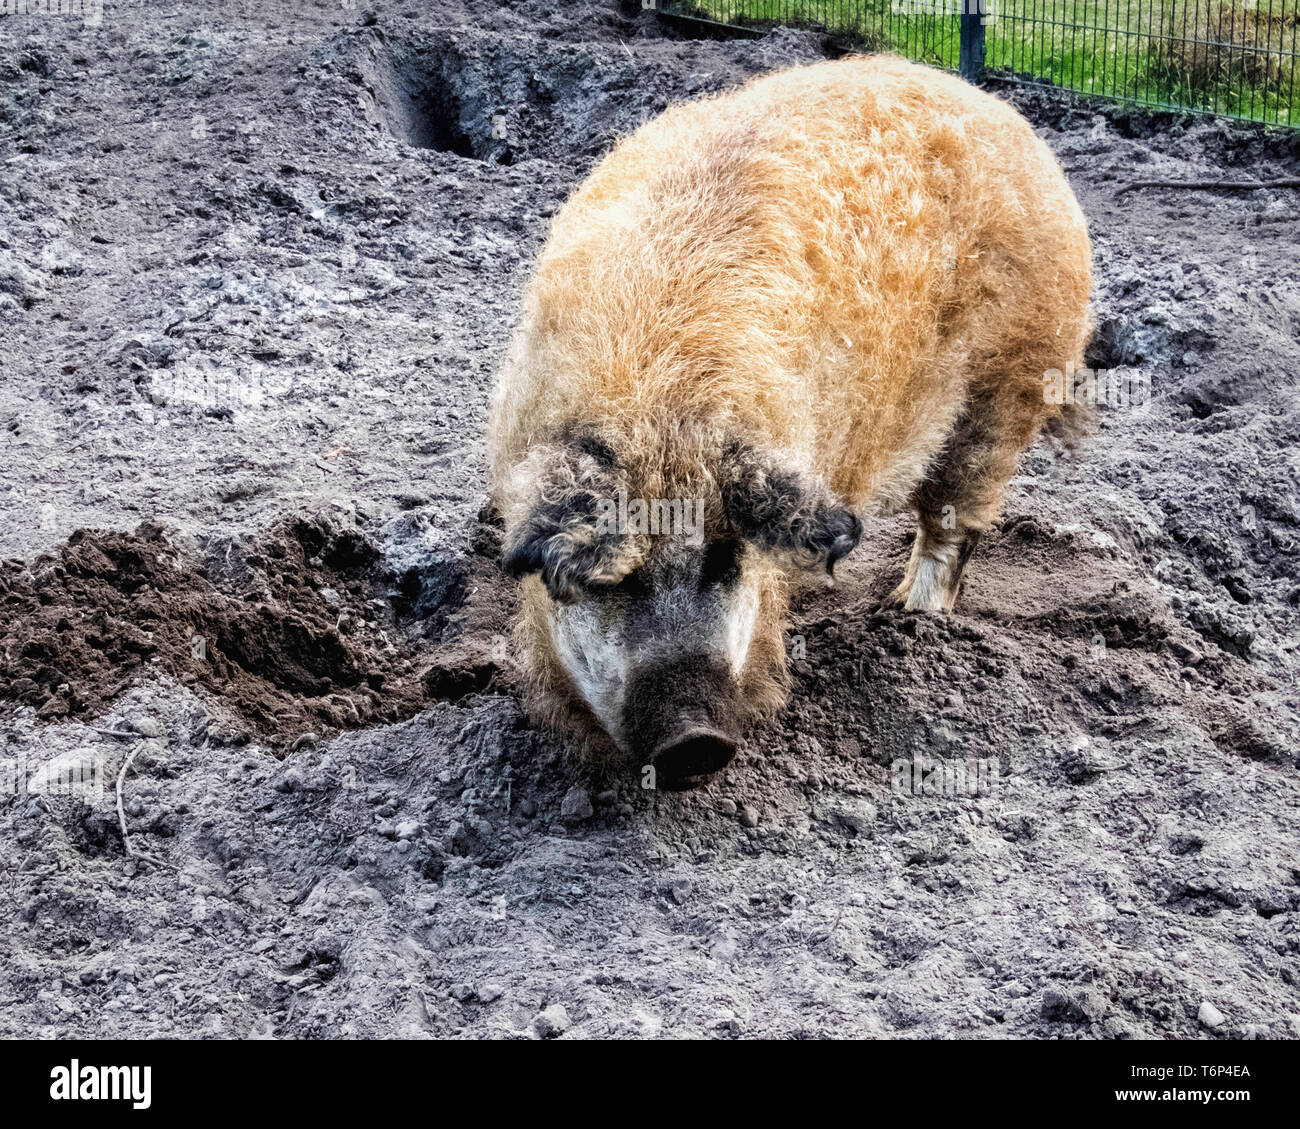 Swallow-bellied Mangalitsa Pig  at the  Schorfheide Game Reserve  in Brandenburg,Germany. The breed was developed mid-nineteenth century Stock Photo